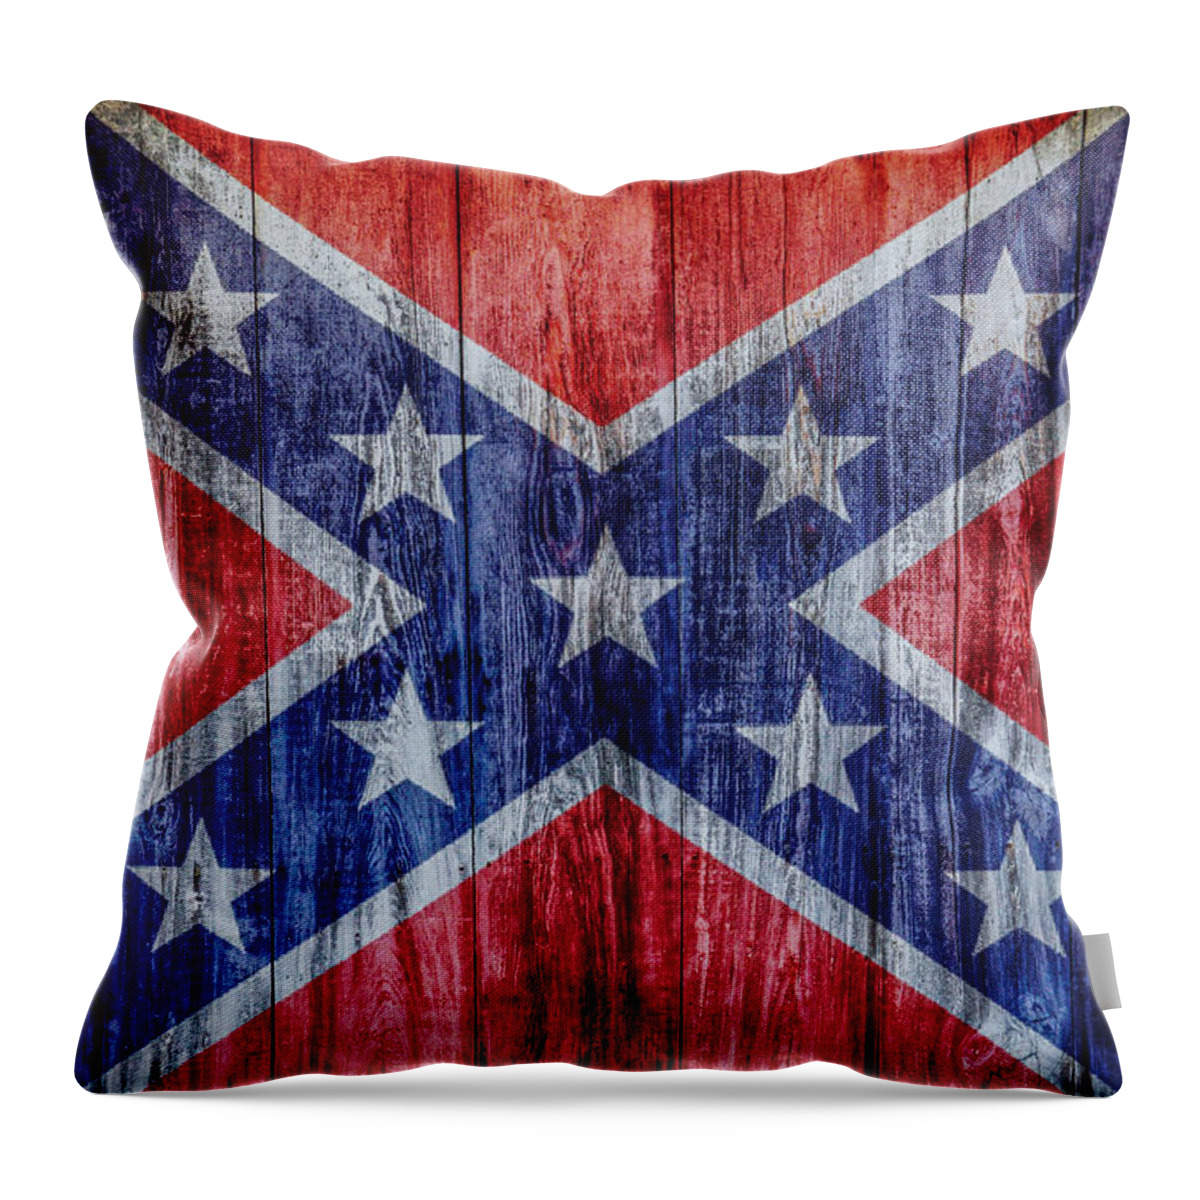 Confederate Flag On Wood Throw Pillow featuring the digital art Confederate Flag On Wood by Randy Steele